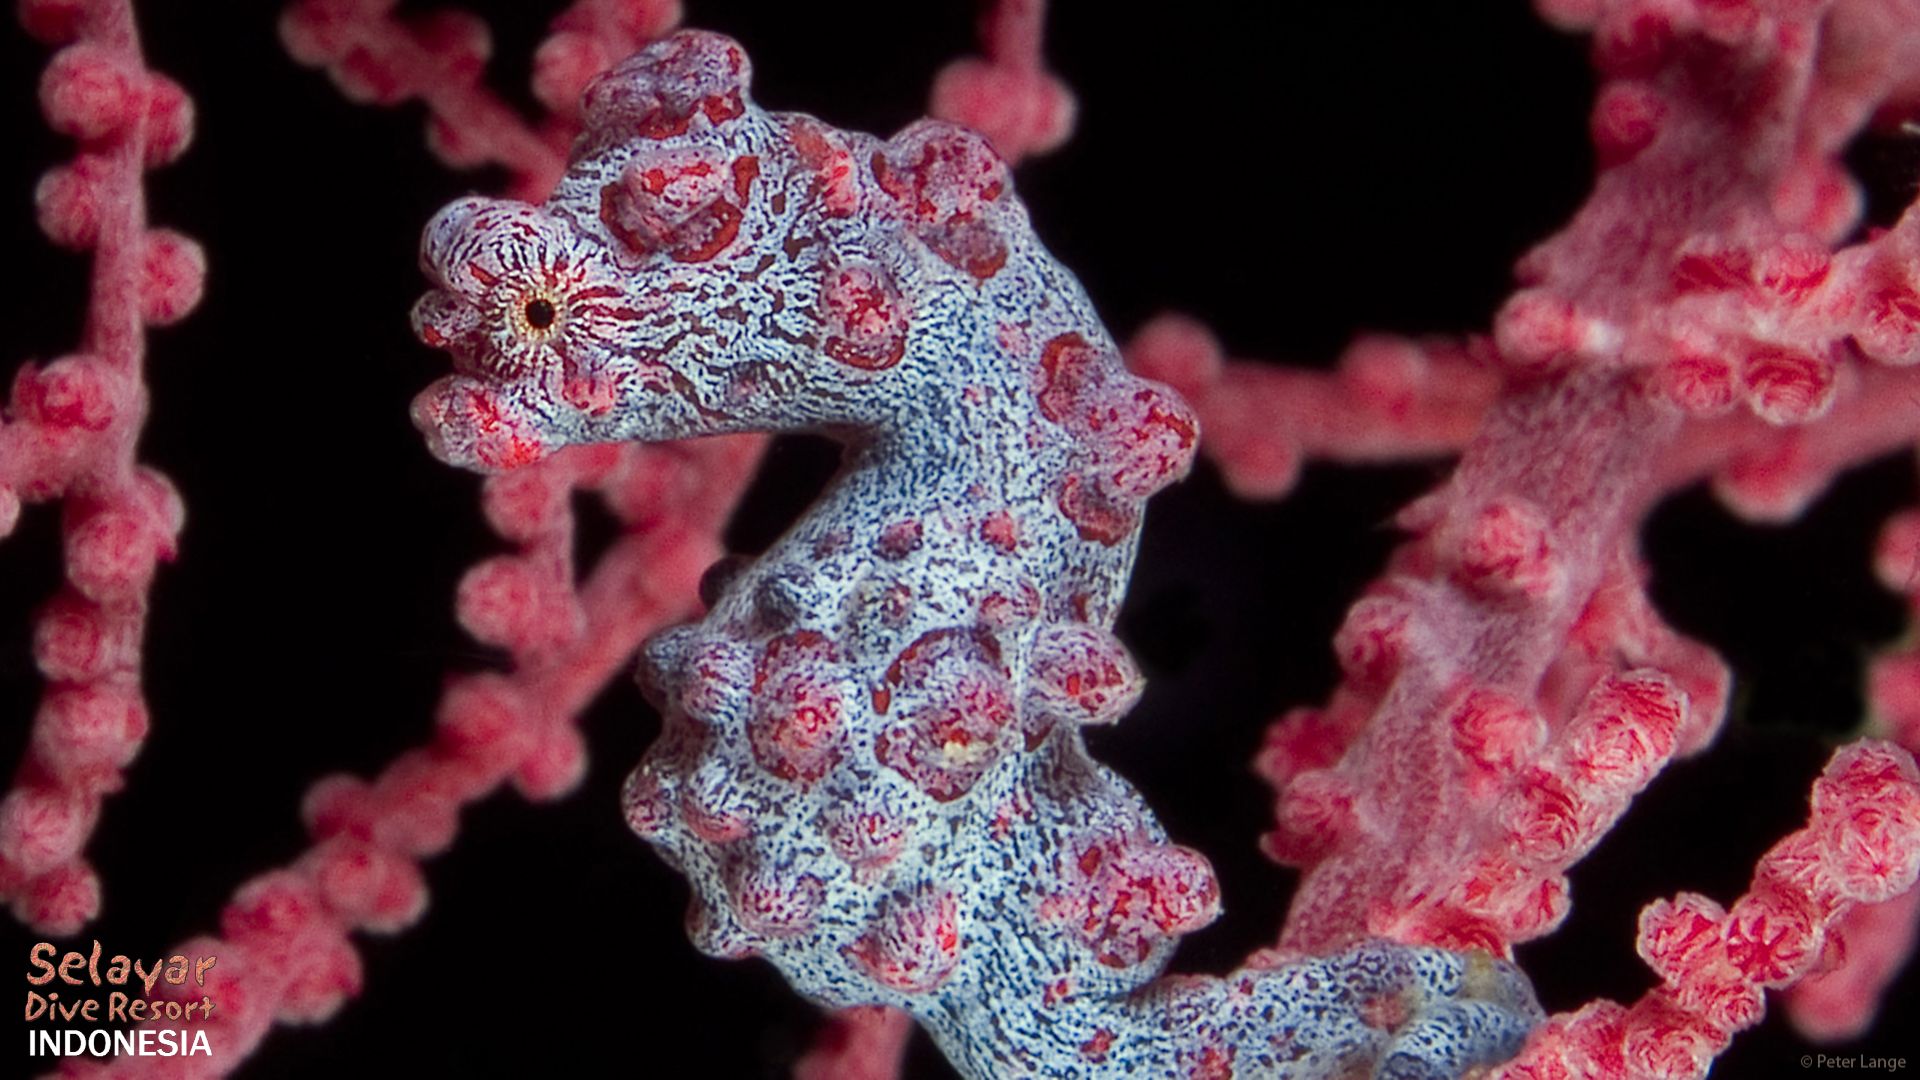 Pygmy Seahorse House Reef diving Indonesia